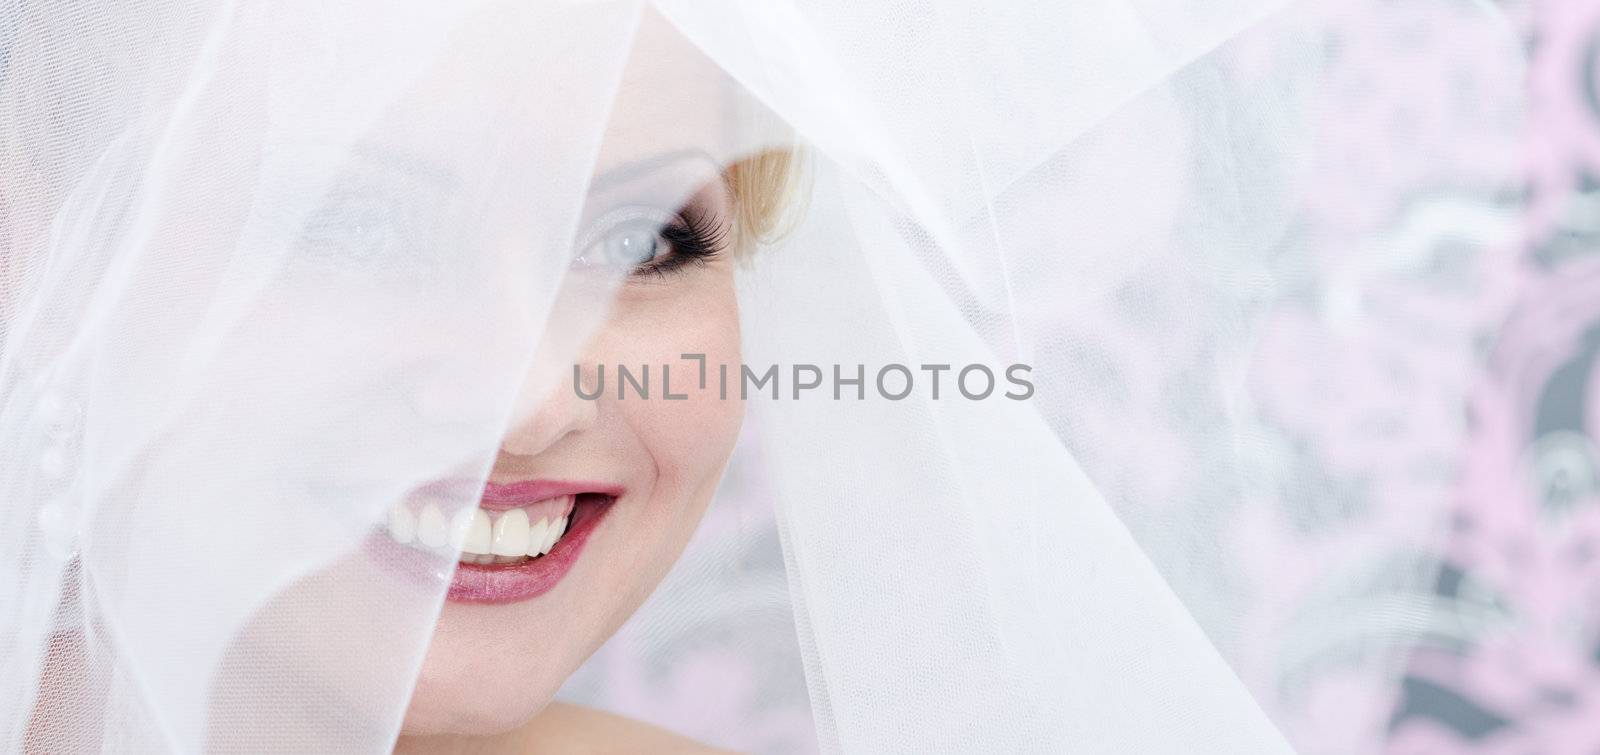 Close up image of the smiling adult bride. Transparent veil cover her face